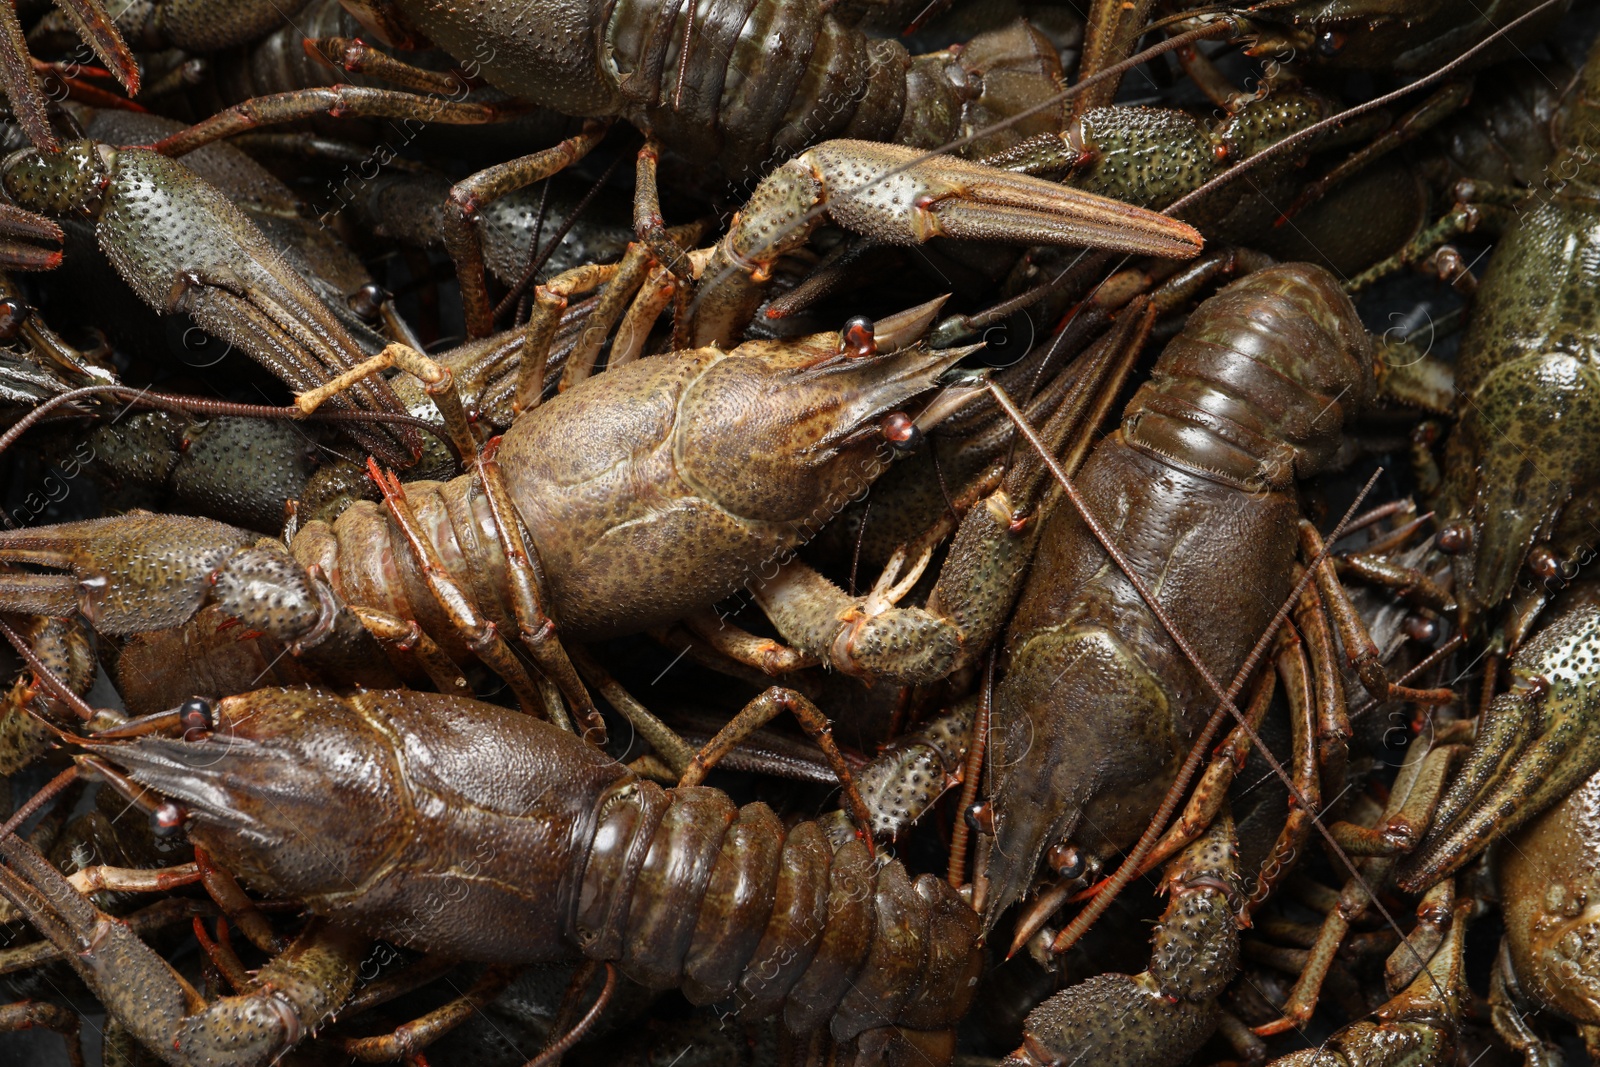 Photo of Heap of fresh raw crayfishes as background, top view